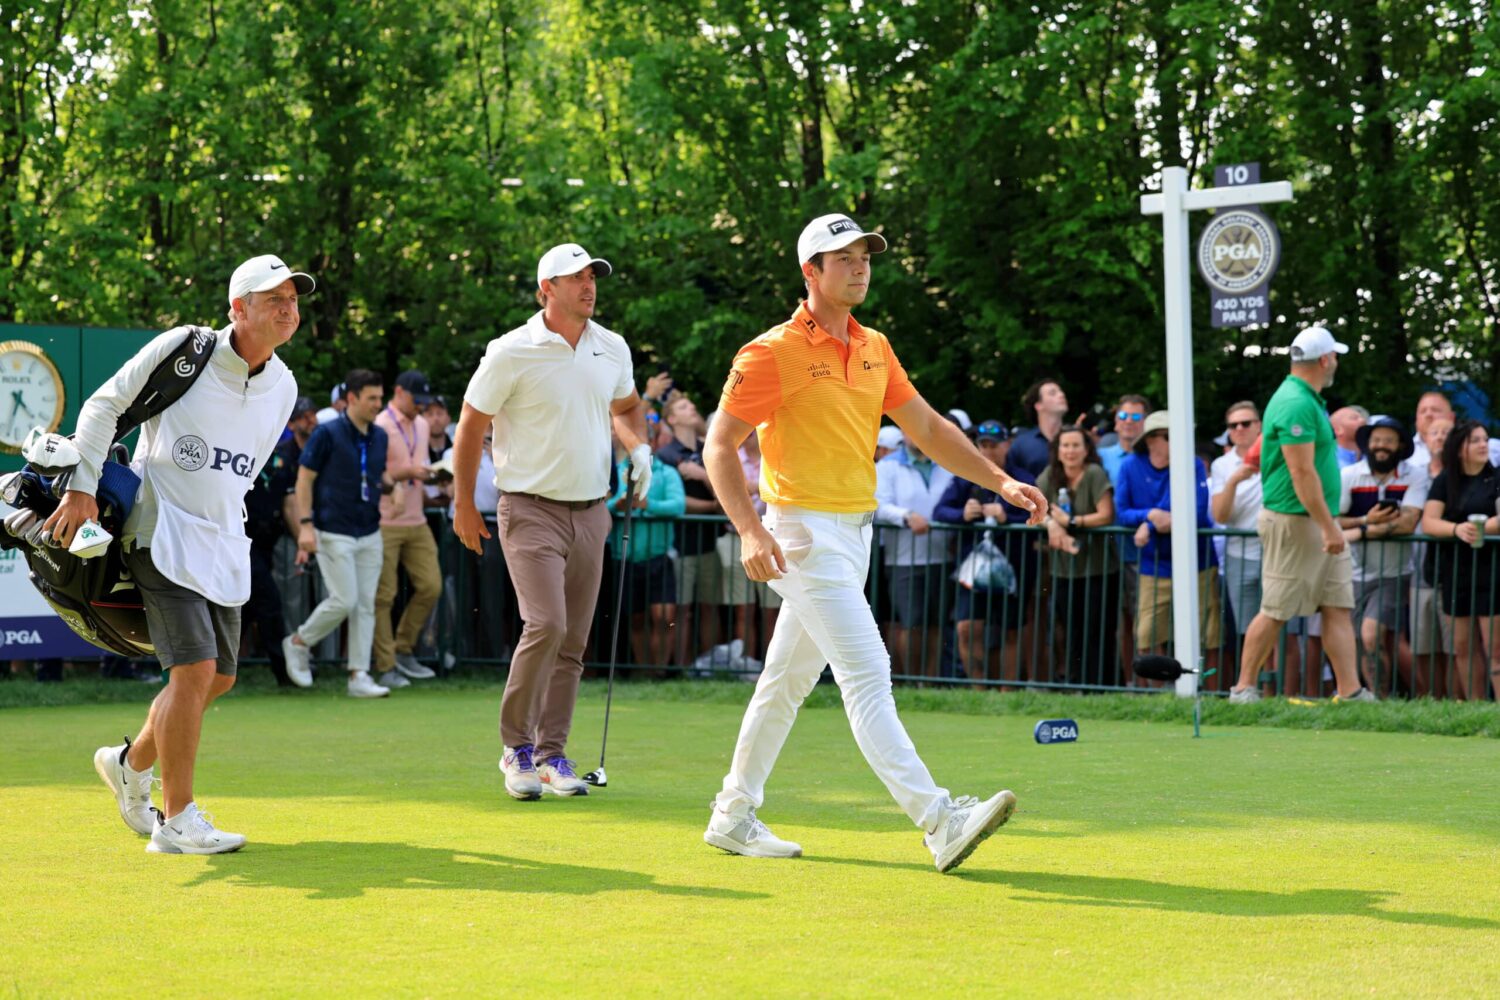 Viktor Hovland and Brooks Koepka walk off the 10th tee during the final round of the PGA Championship golf tournament at Oak Hill Country Club.